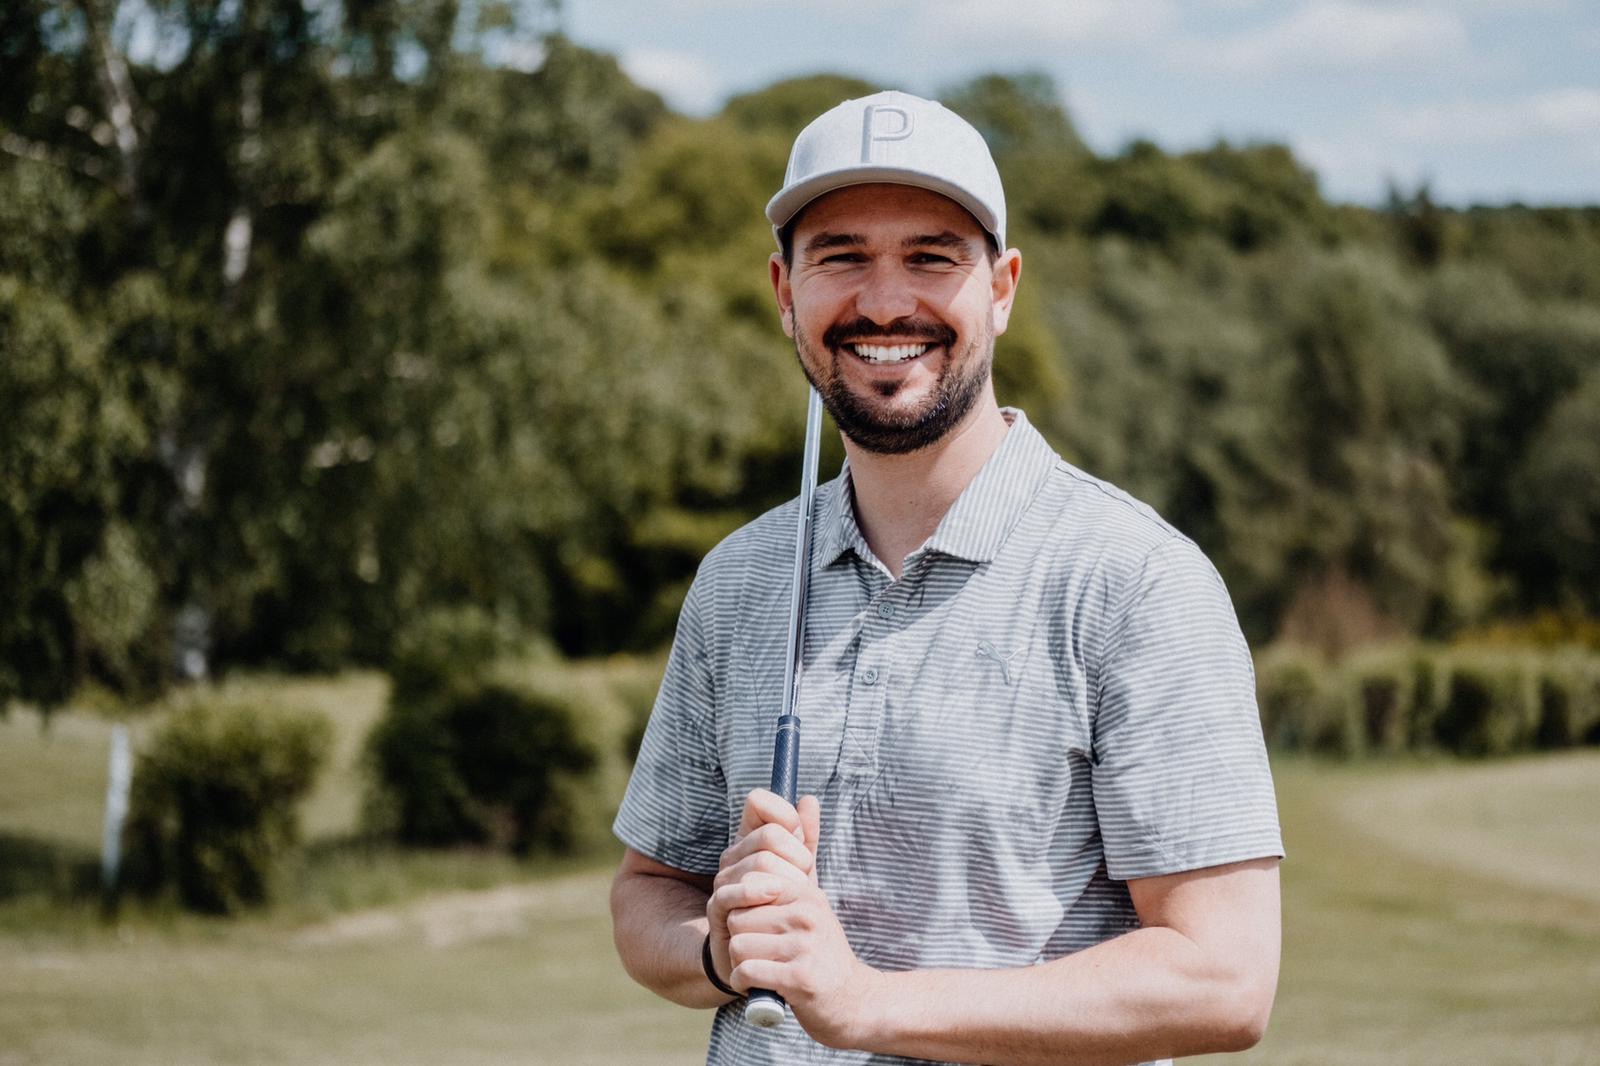 Steffen Bents, Fully Qualified PGA Professional